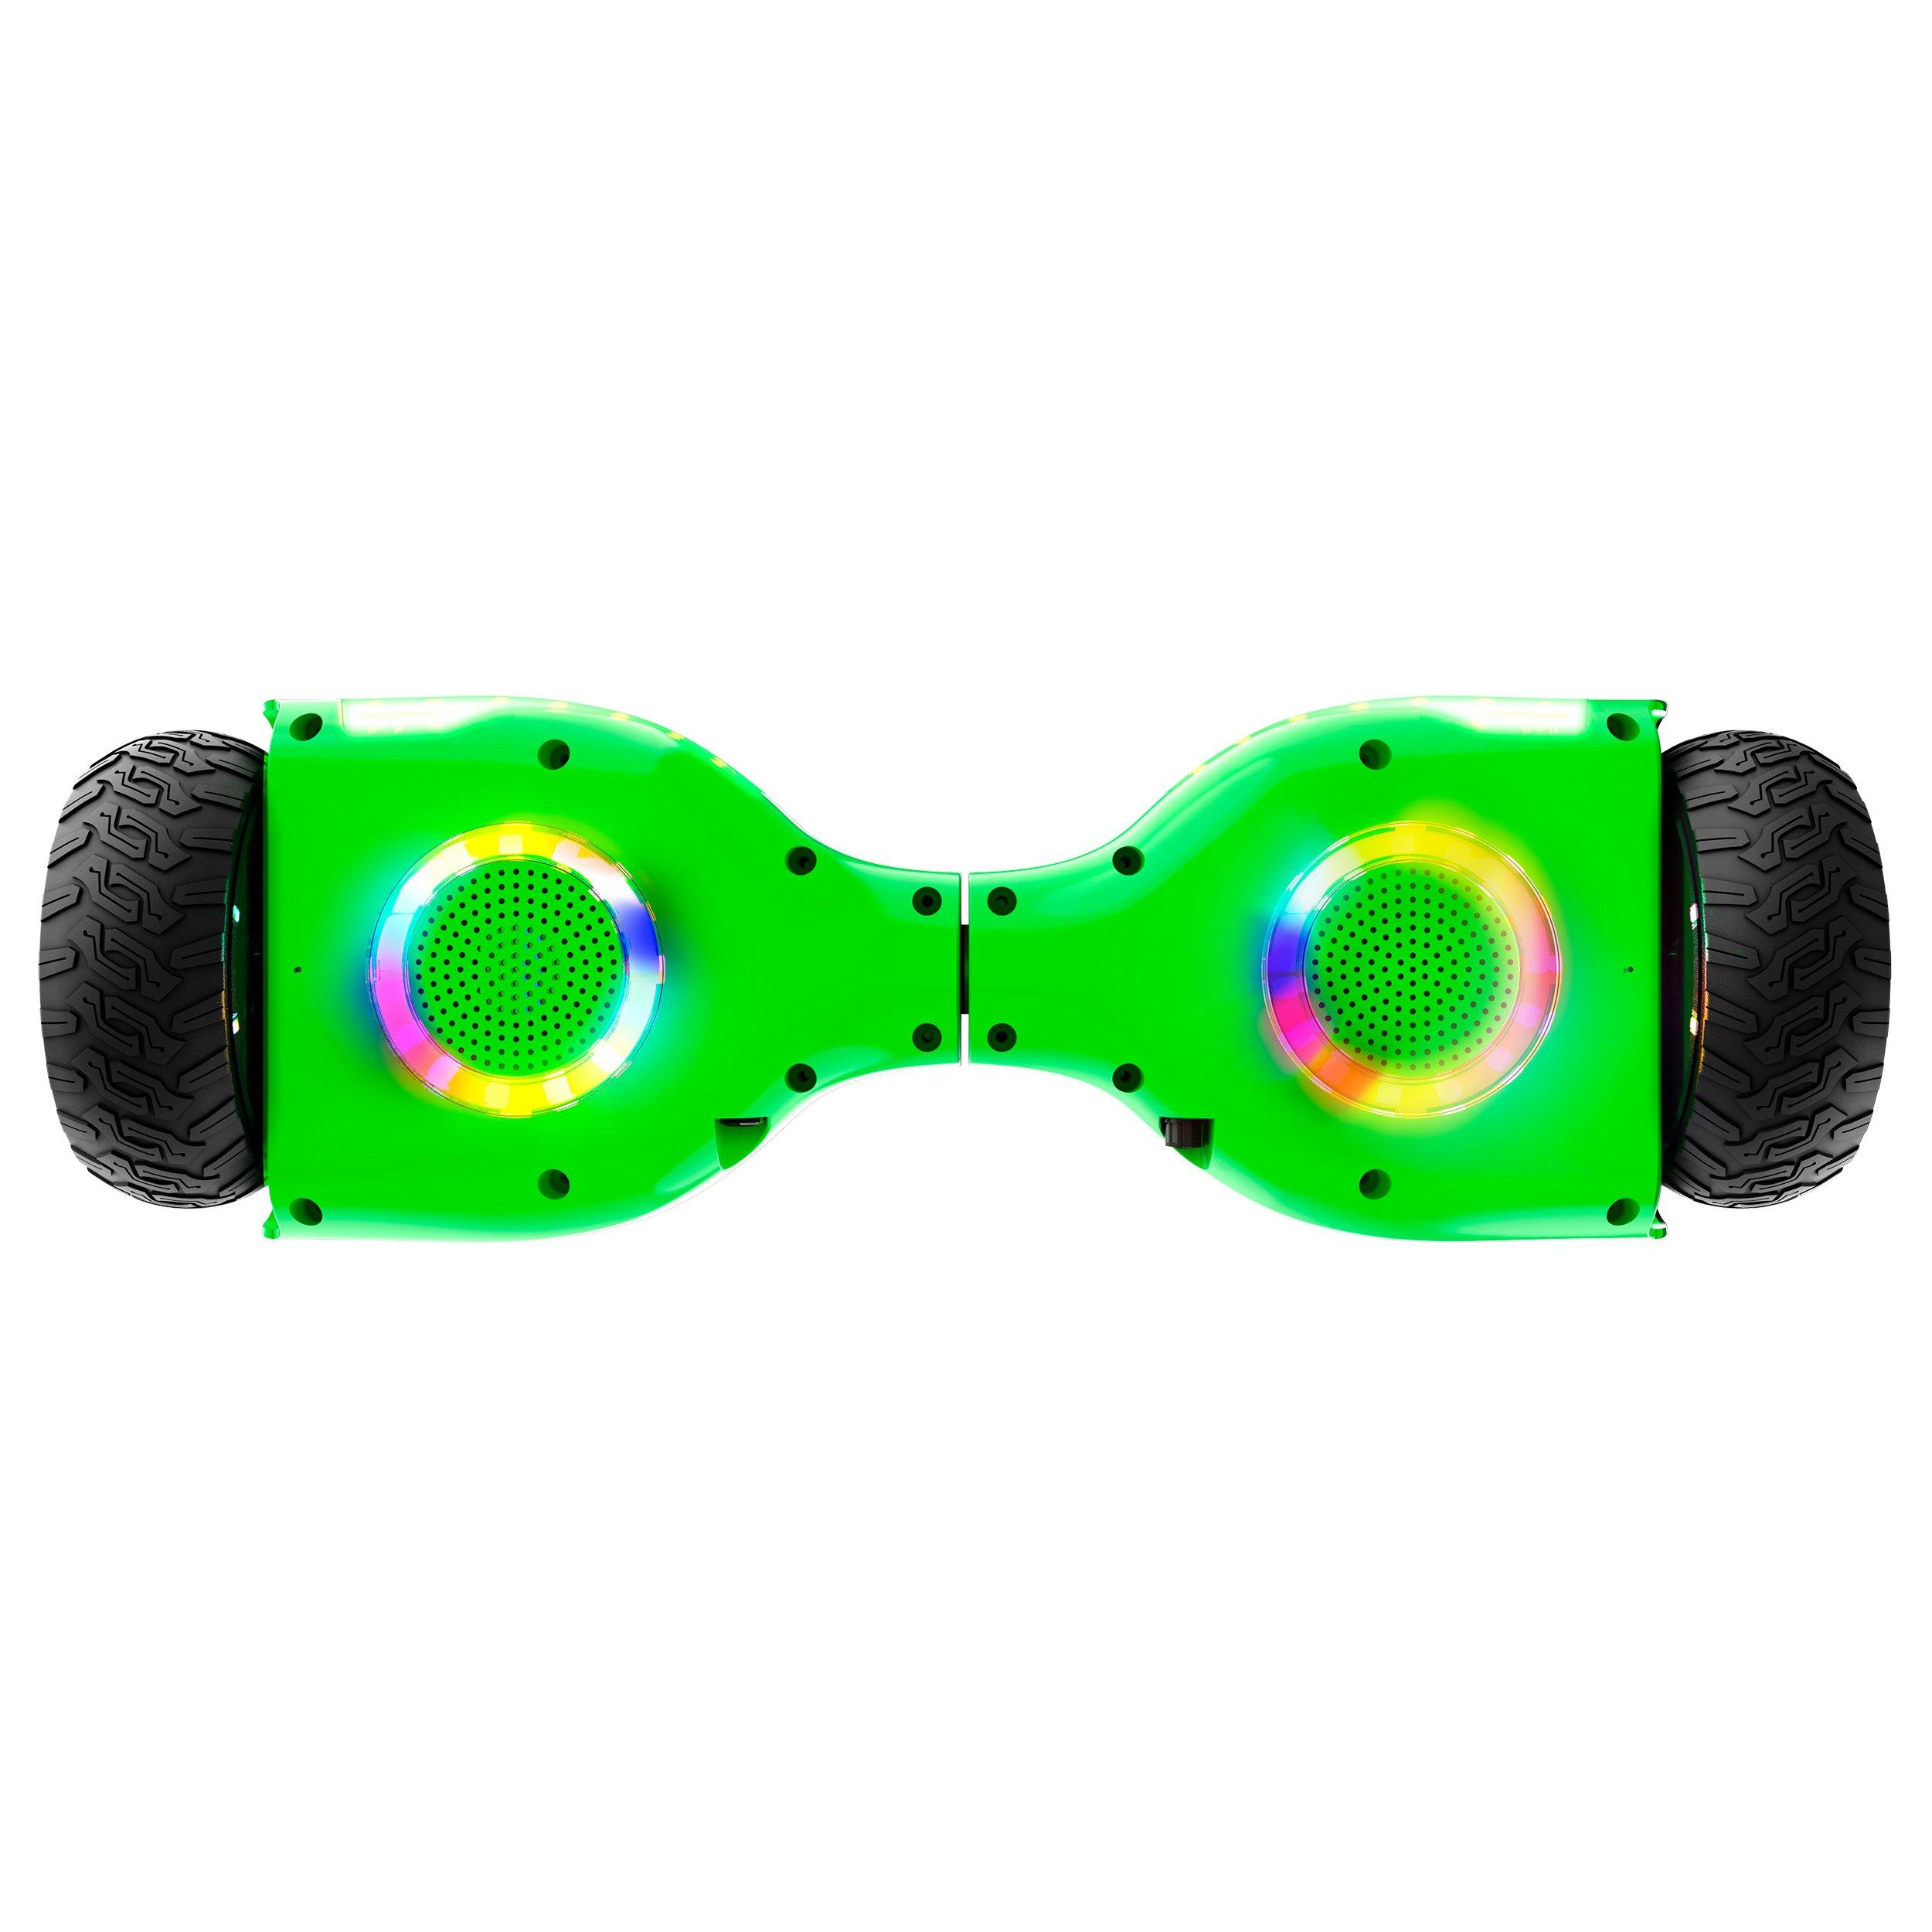 list item 7 of 9 swagBOARD Warrior T580 Hoverboard with MusicSynced Light-Up LED Wheels